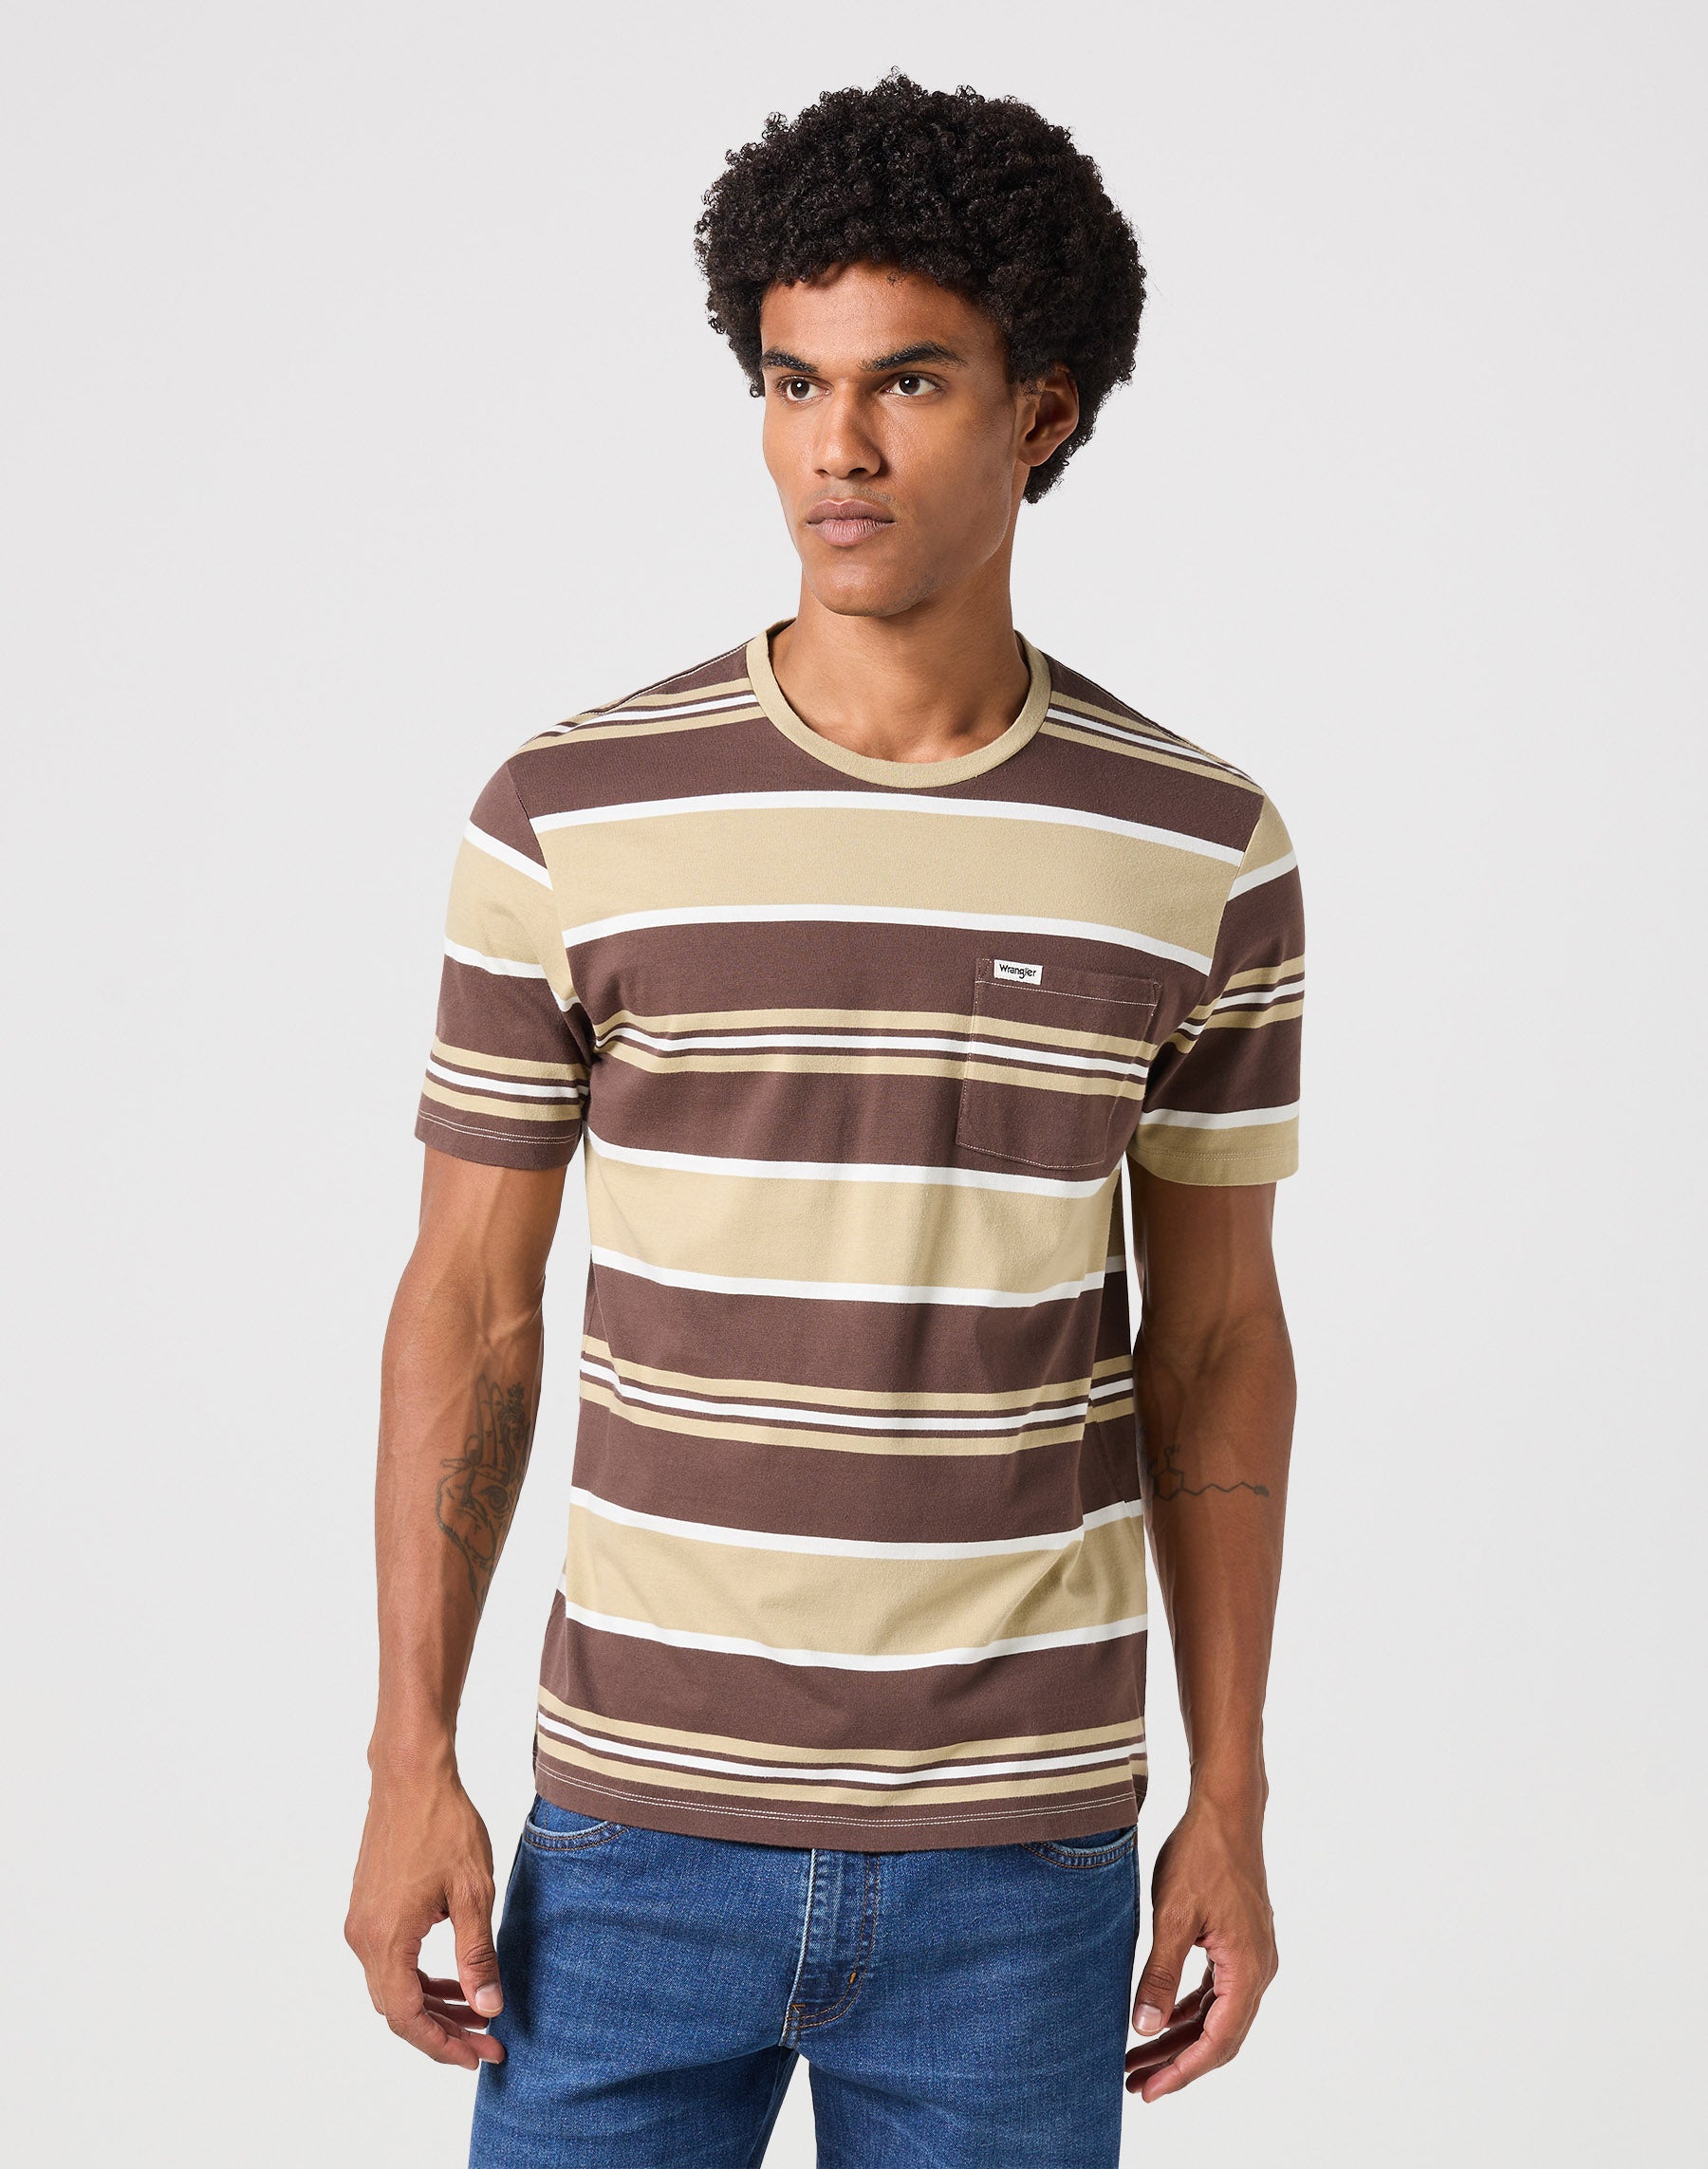 Pocket Tee in Plaza Taupe T-Shirts Wrangler   